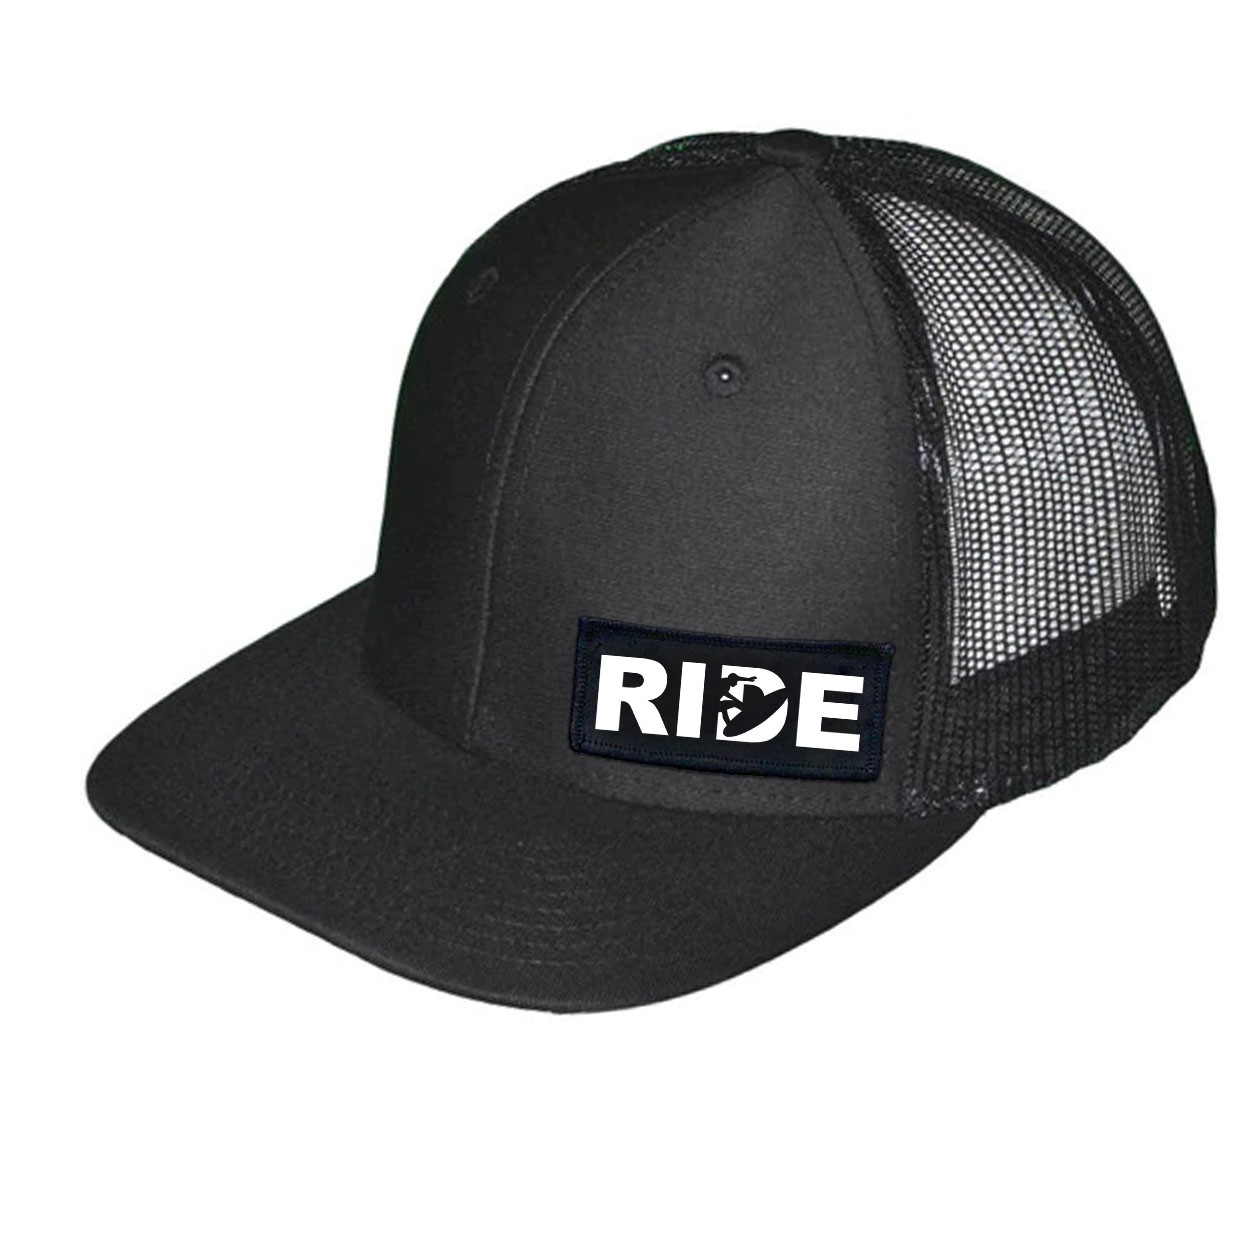 Ride Surf Logo Night Out Woven Patch Snapback Trucker Hat Black (White Logo)